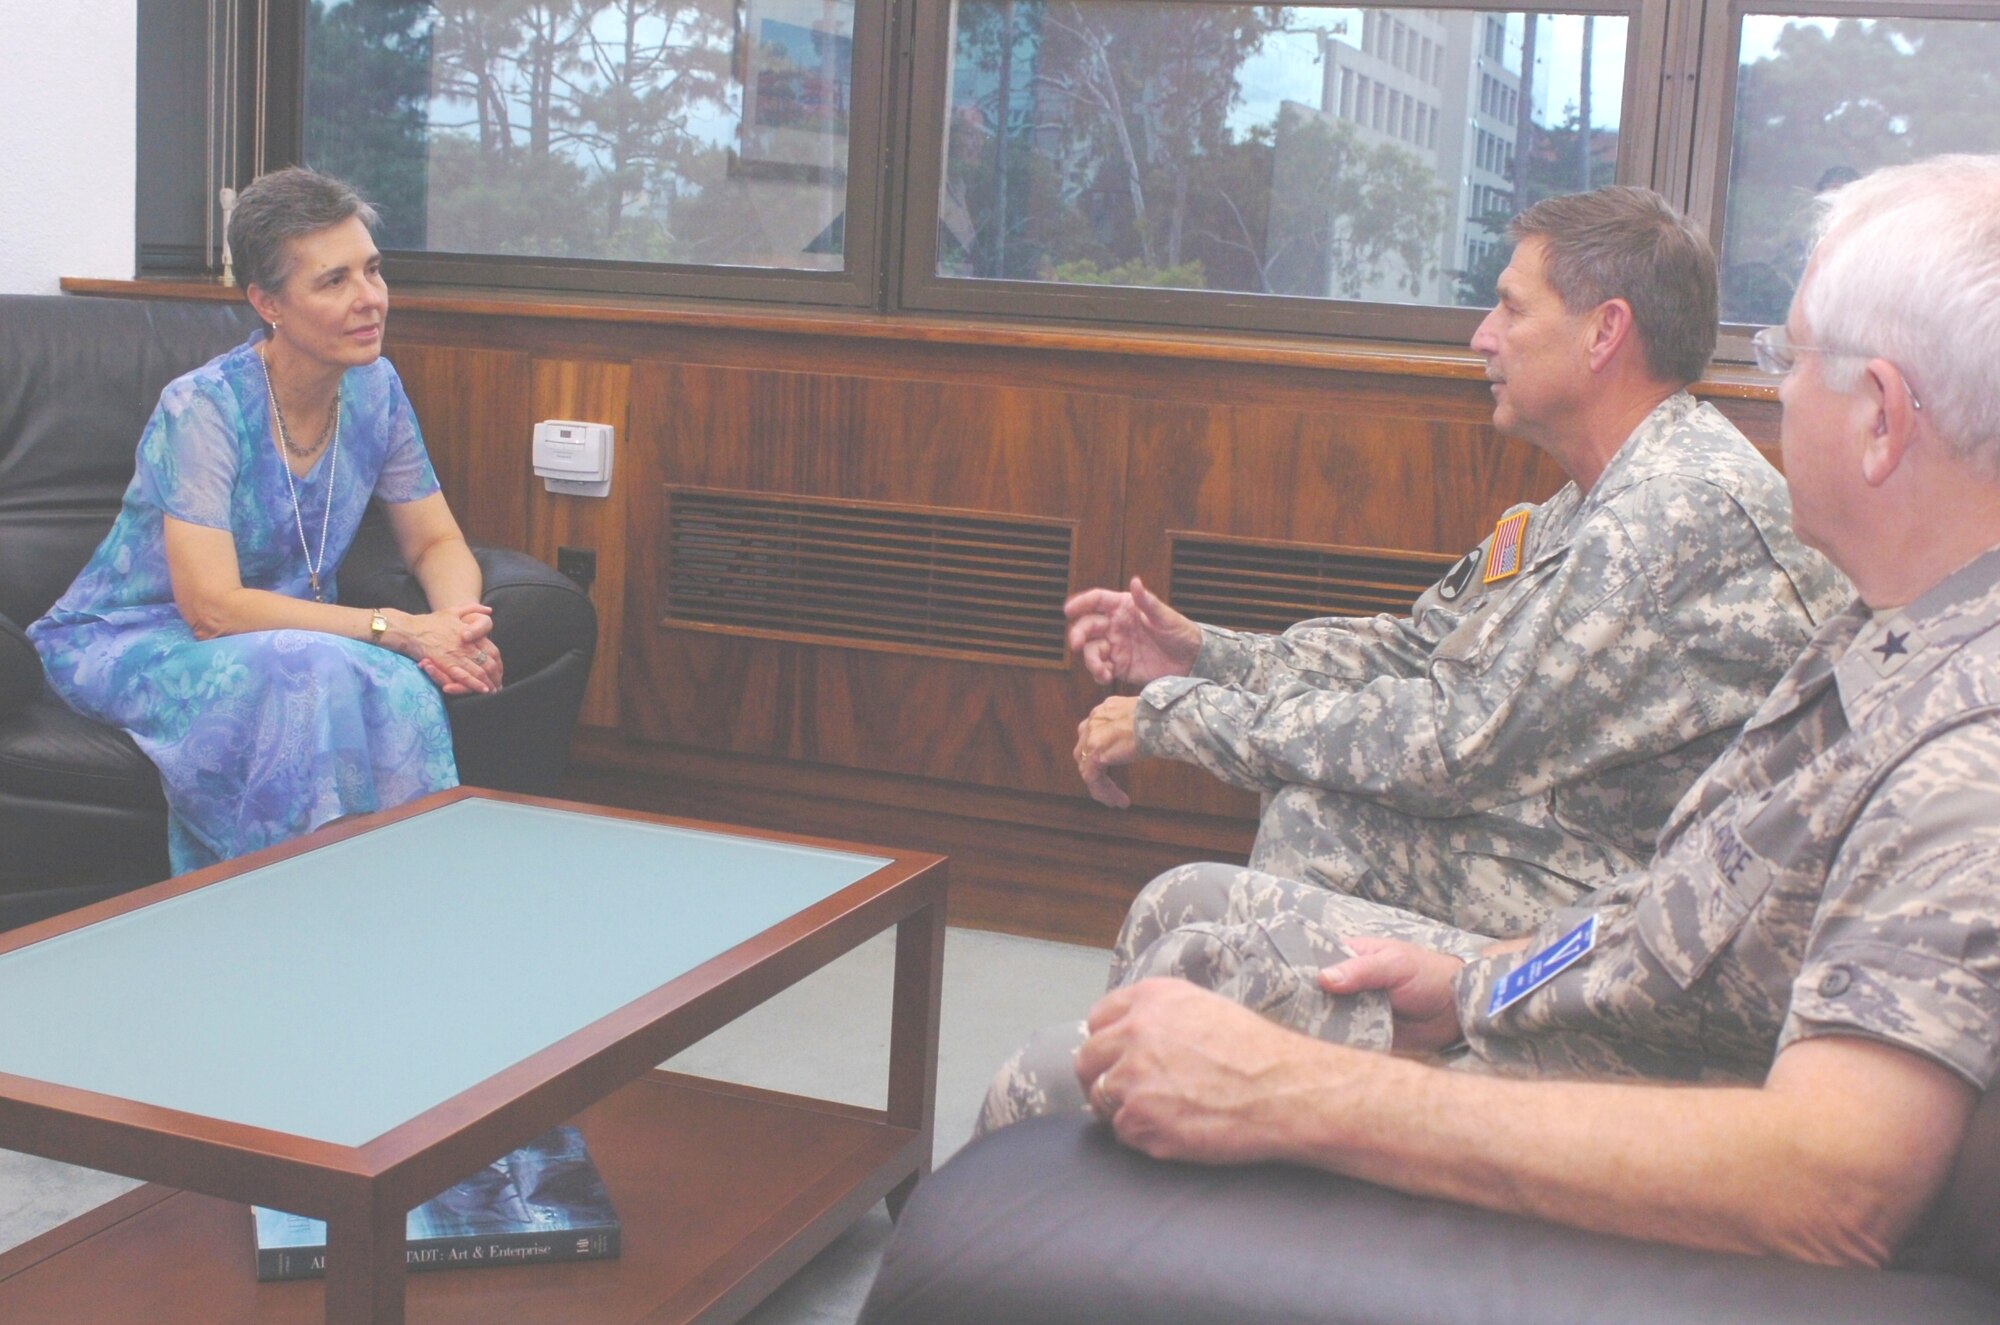 Embassy Meeting – Maj. Gen. William Wofford (center), adjutant general of the Arkansas National Guard and Brig. Gen. Riley Porter (right), commander of the Arkansas Air National Guard meet with Ms. Kay Anske, deputy chief of missions at the U.S. Embassy in Guatemala.  The generals, along with commanders and senior enlisted advisors of several units of the Arkansas Air National Guard were in Guatemala Aug. 5-8 for a Senior Leader Exchange with the Guatemalan Air Force as part of the State Partnership Program through the National Guard Bureau.  The generals explained the capabilities and missions of the Guard, and discussed possible future cooperative exchanges with the Guatemalan military. (Air Force Photo by Maj. Keith Moore, Public Affairs Officer, Joint Force Headquarters, Arkansas Air National Guard.)